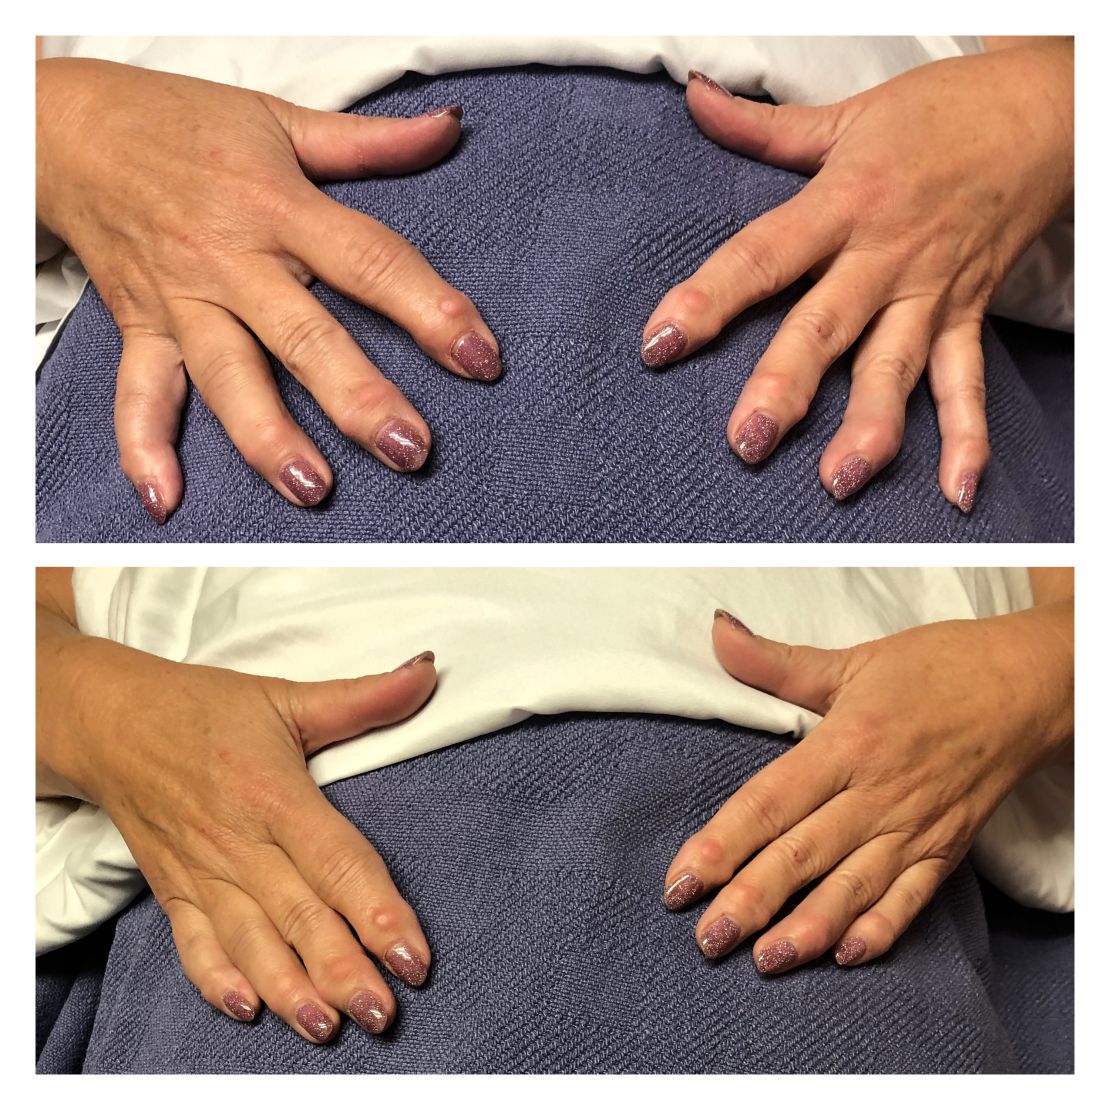 90 minute before and after Manual Lymphatic Drainage arms and Hands